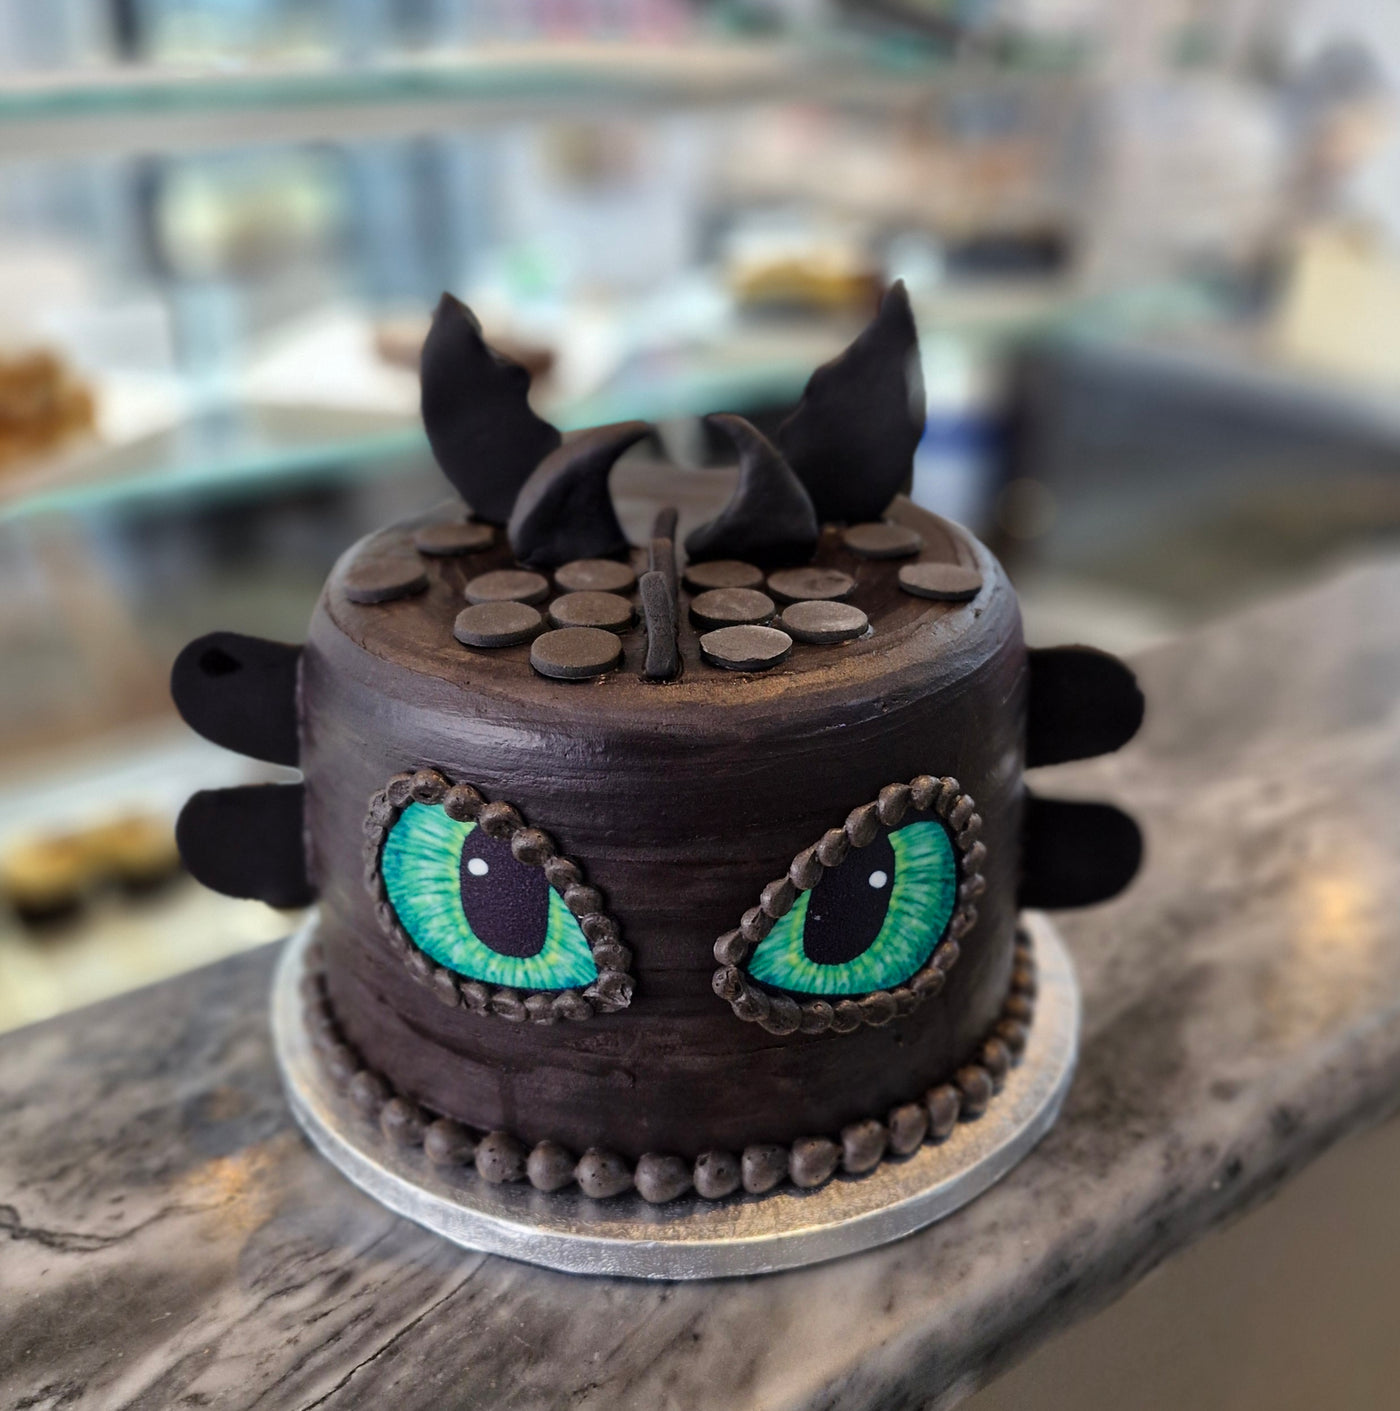 How to Train Your Dragon Cake